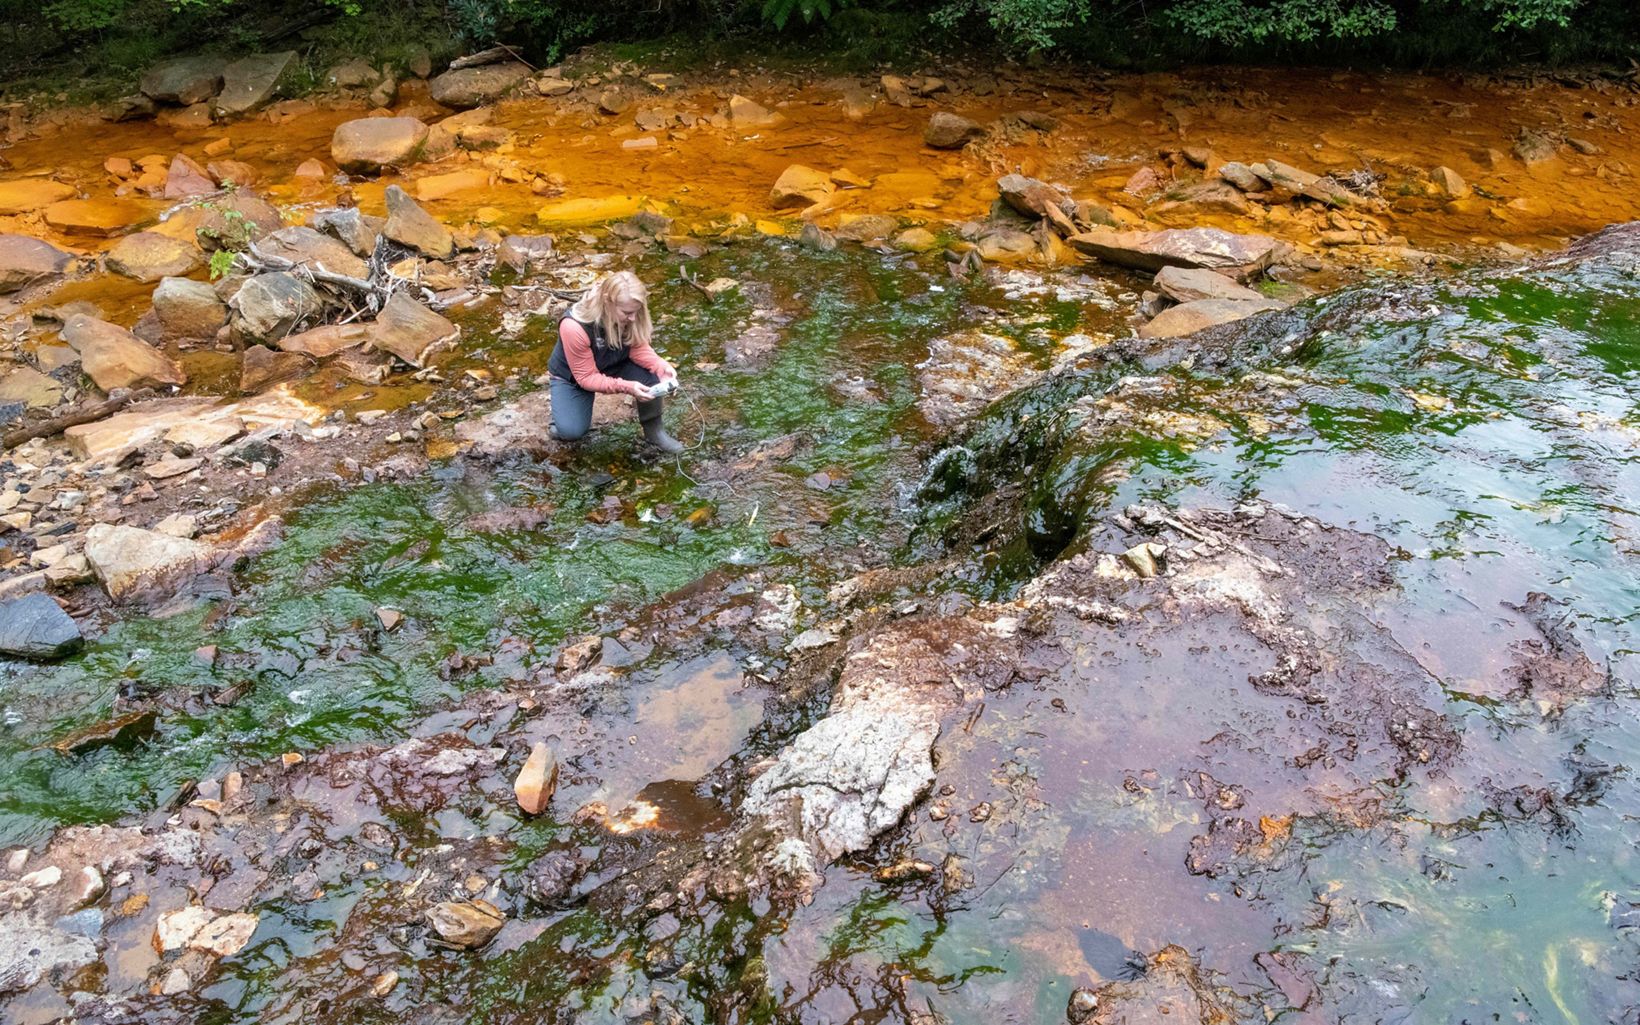 A woman crouches in a shallow part of water that is unnaturally colored green and orange and brown.She has an instrument in her hands.